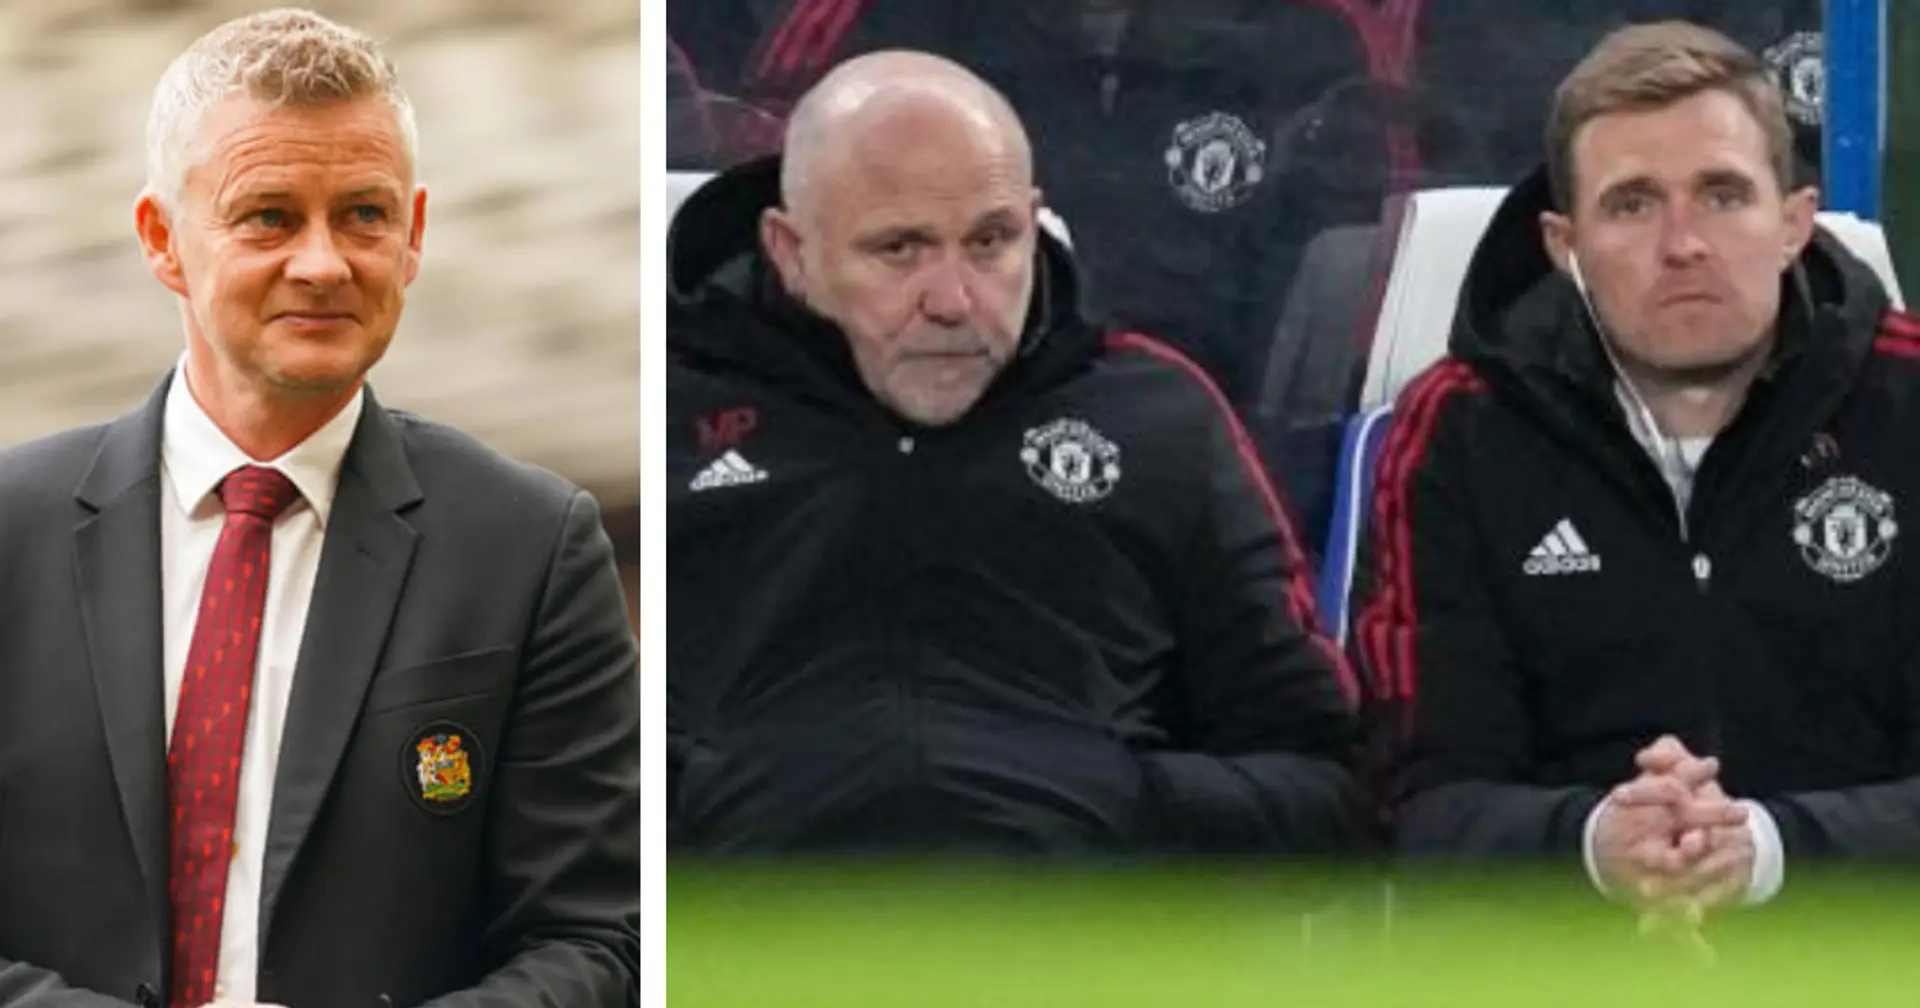 Man United staff were 'moved to tears' by Solskjaer's gesture after sacking